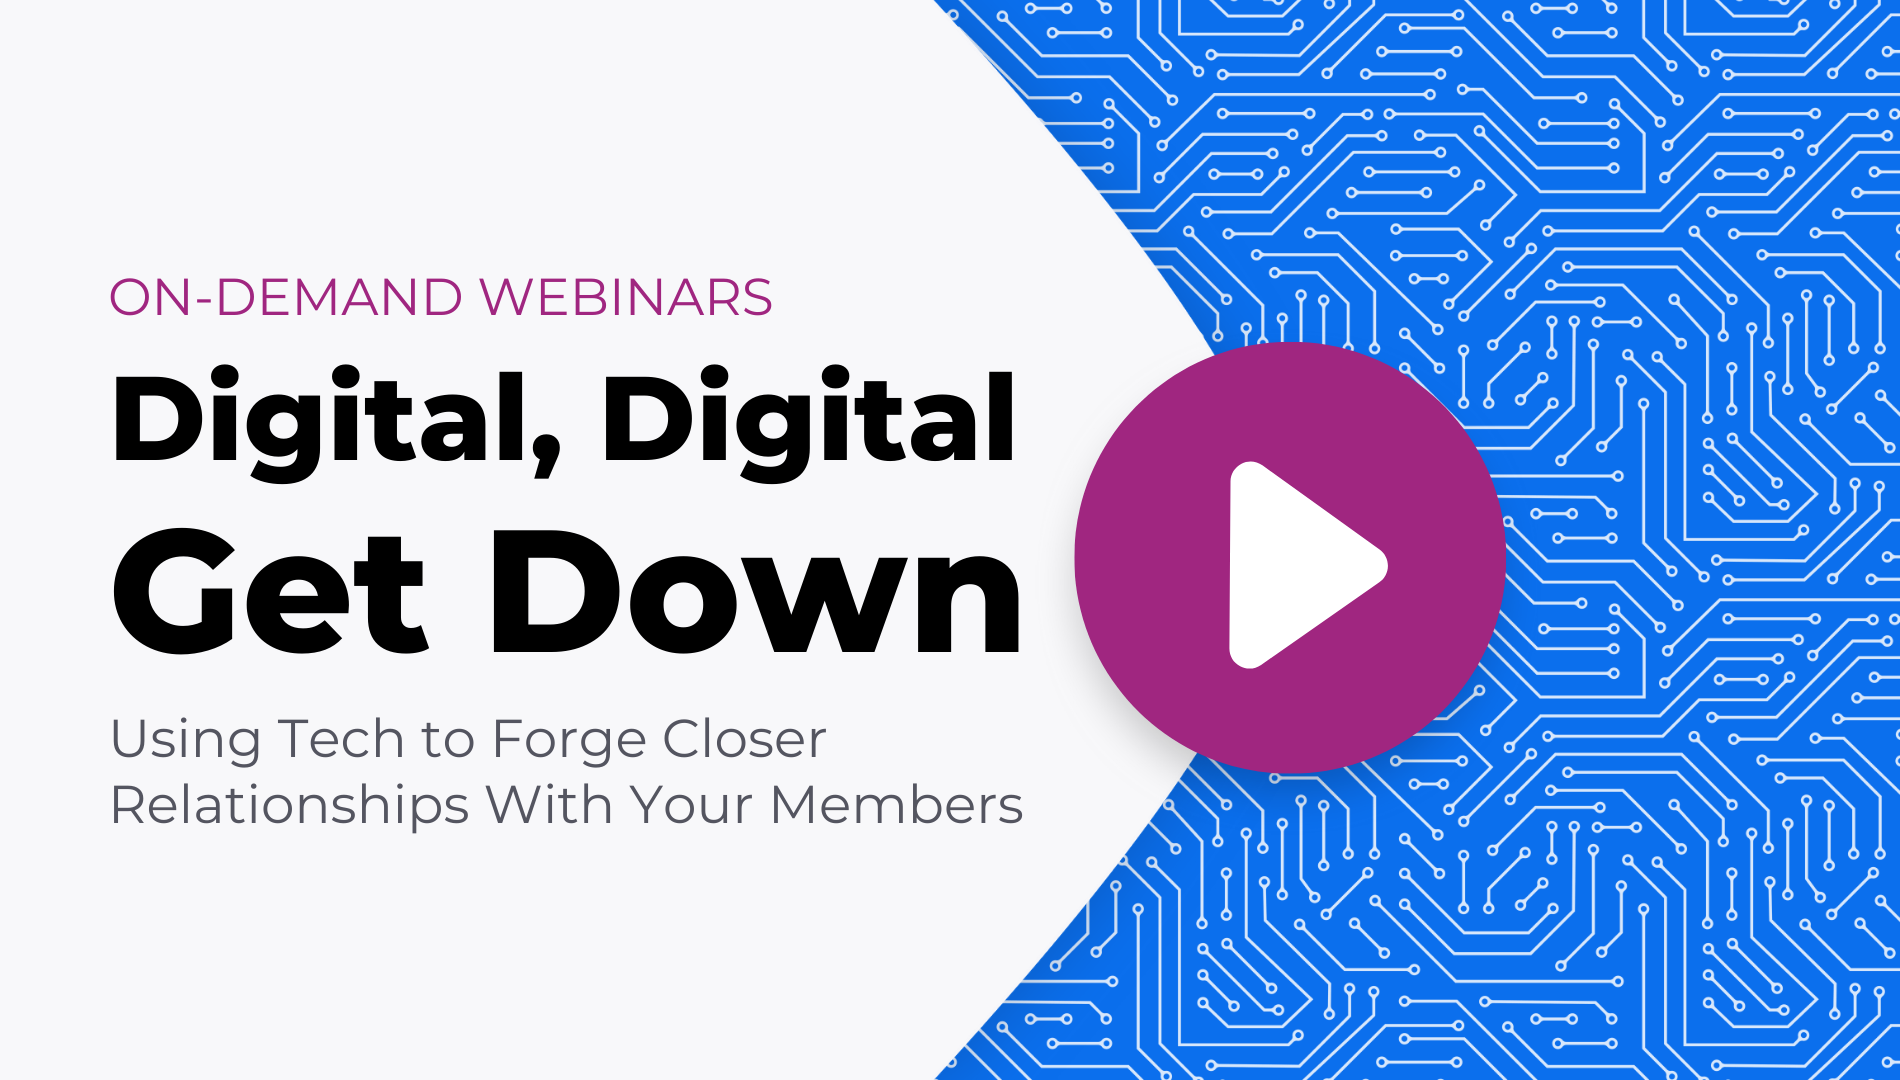 Digital, Digital Get Down: Using Tech to Forge Closer Relationships With Your Members